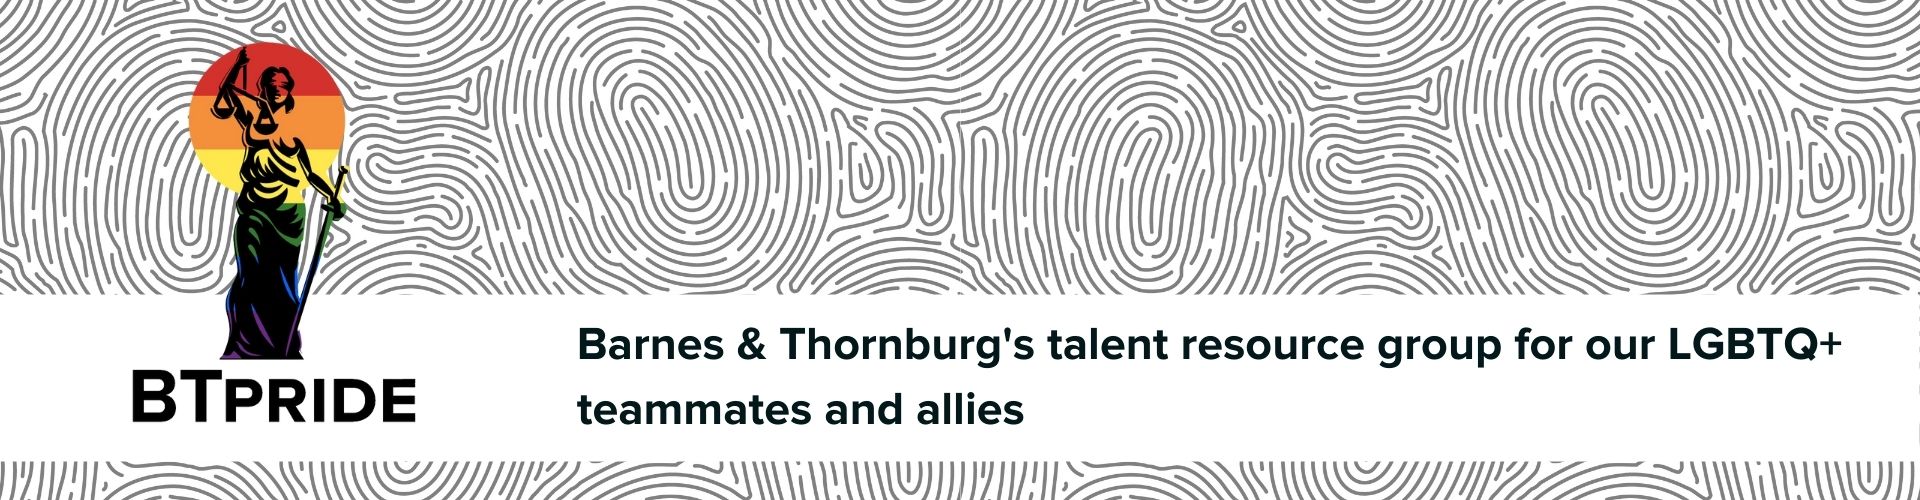 BT Pride: Barnes & Thornburg's talent resource group for our LGBTQ teammates and allies